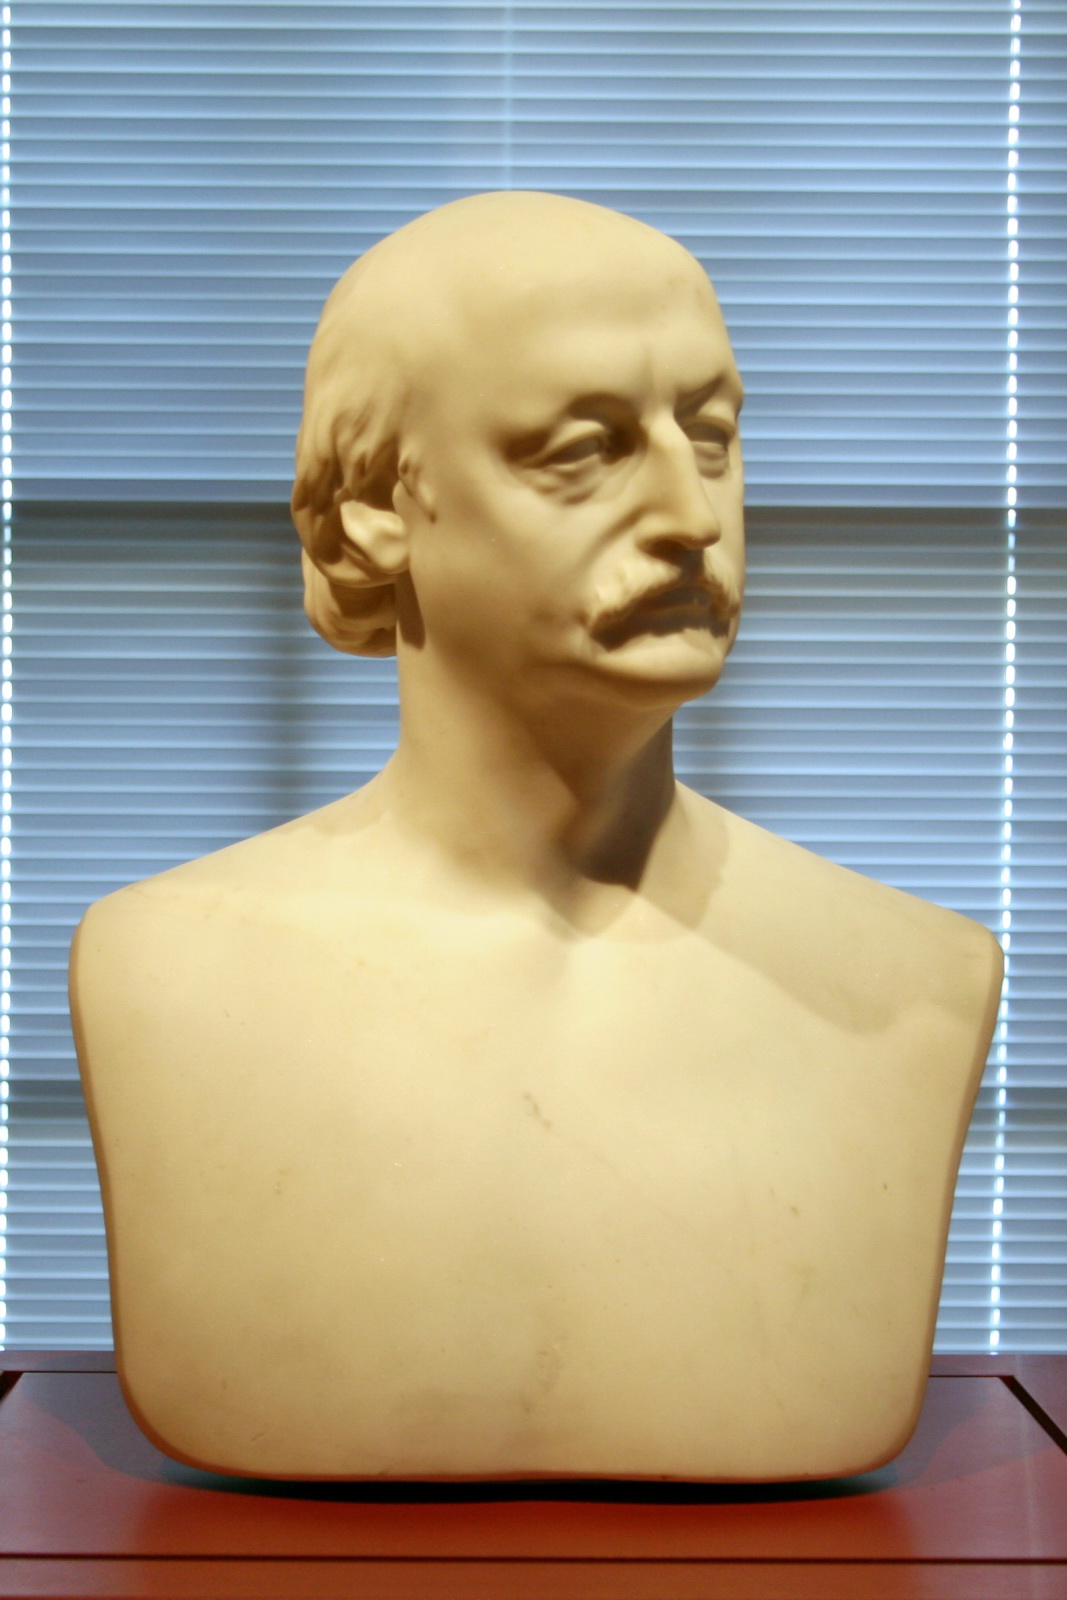 a plaster bust of a man in front of blinds